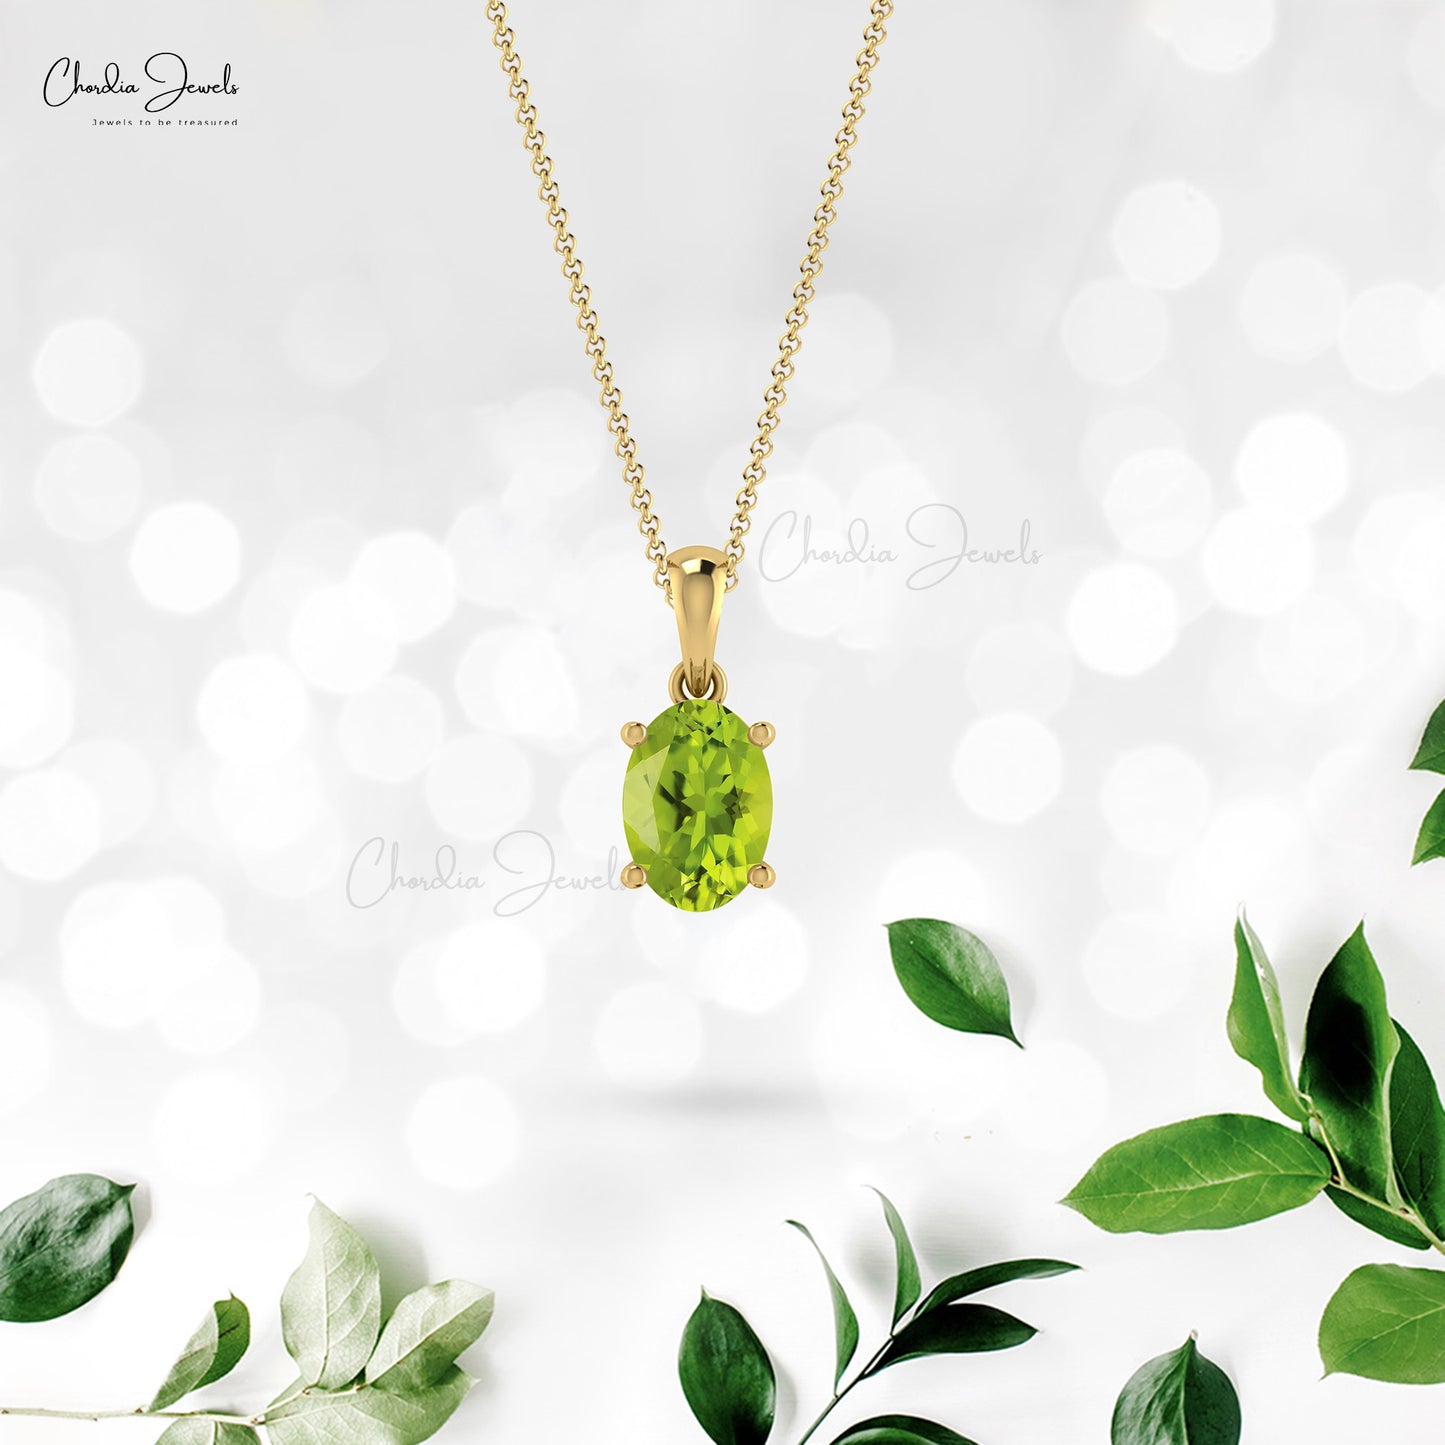 Green Peridot August Birthstone Solitaire Pendant 7x5mm Oval Cut Natural Gemstone 14k Real Gold Hallmarked Fine Jewelry